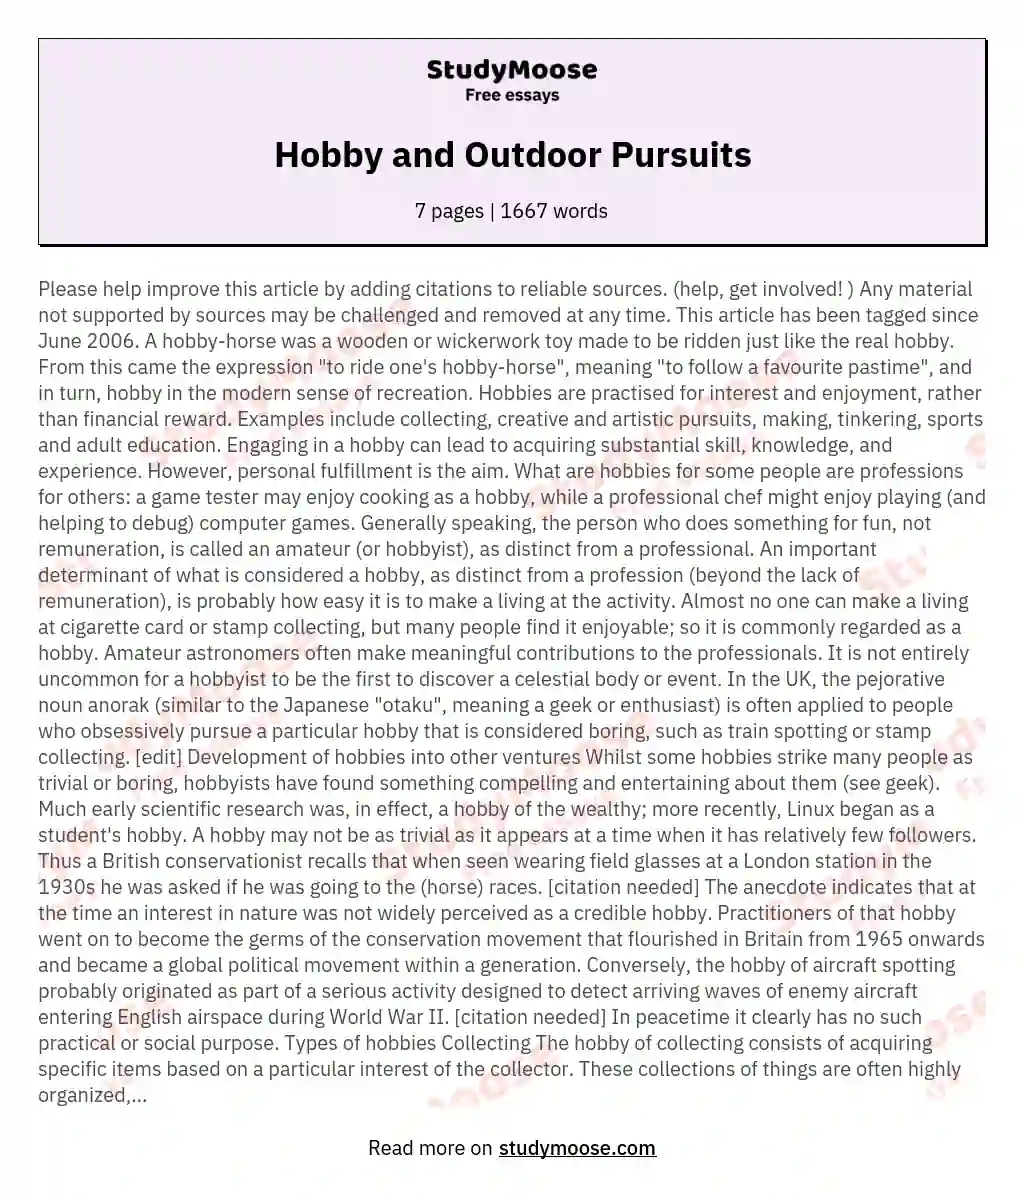 Hobby and Outdoor Pursuits